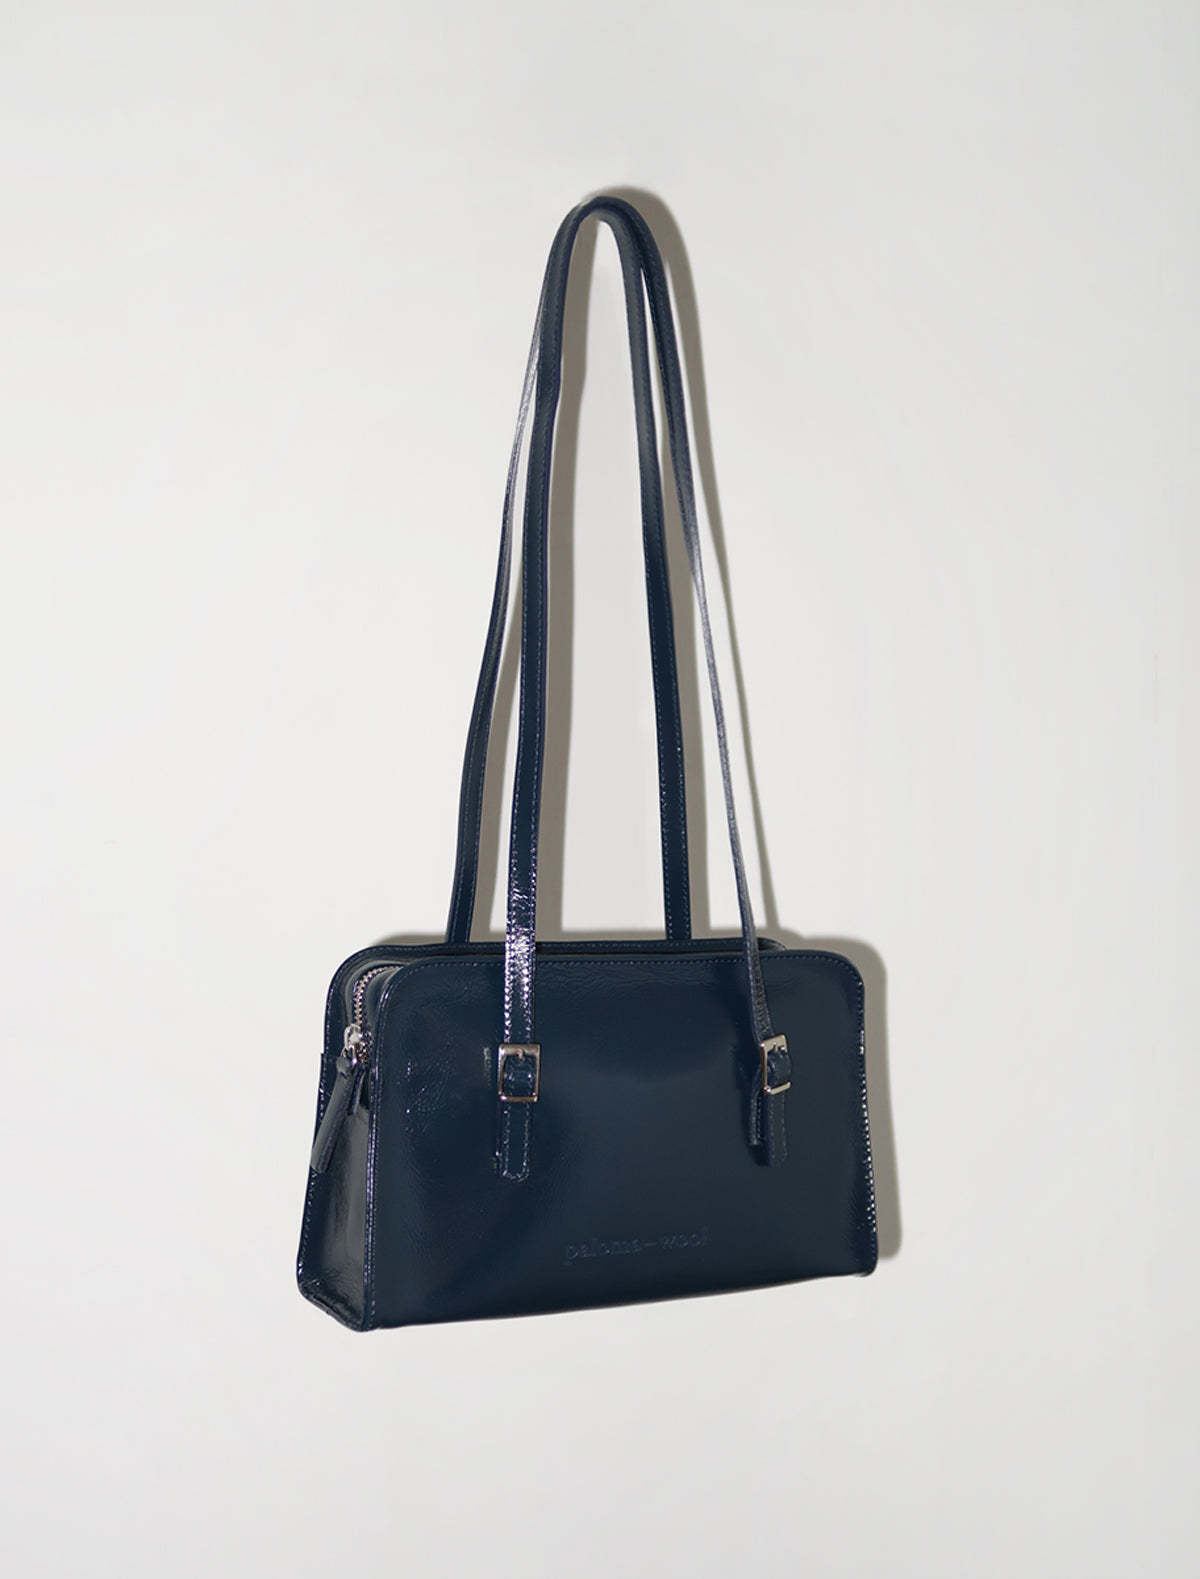 CAYETANO-Navy leather bag with engraved logo and inside pocket.